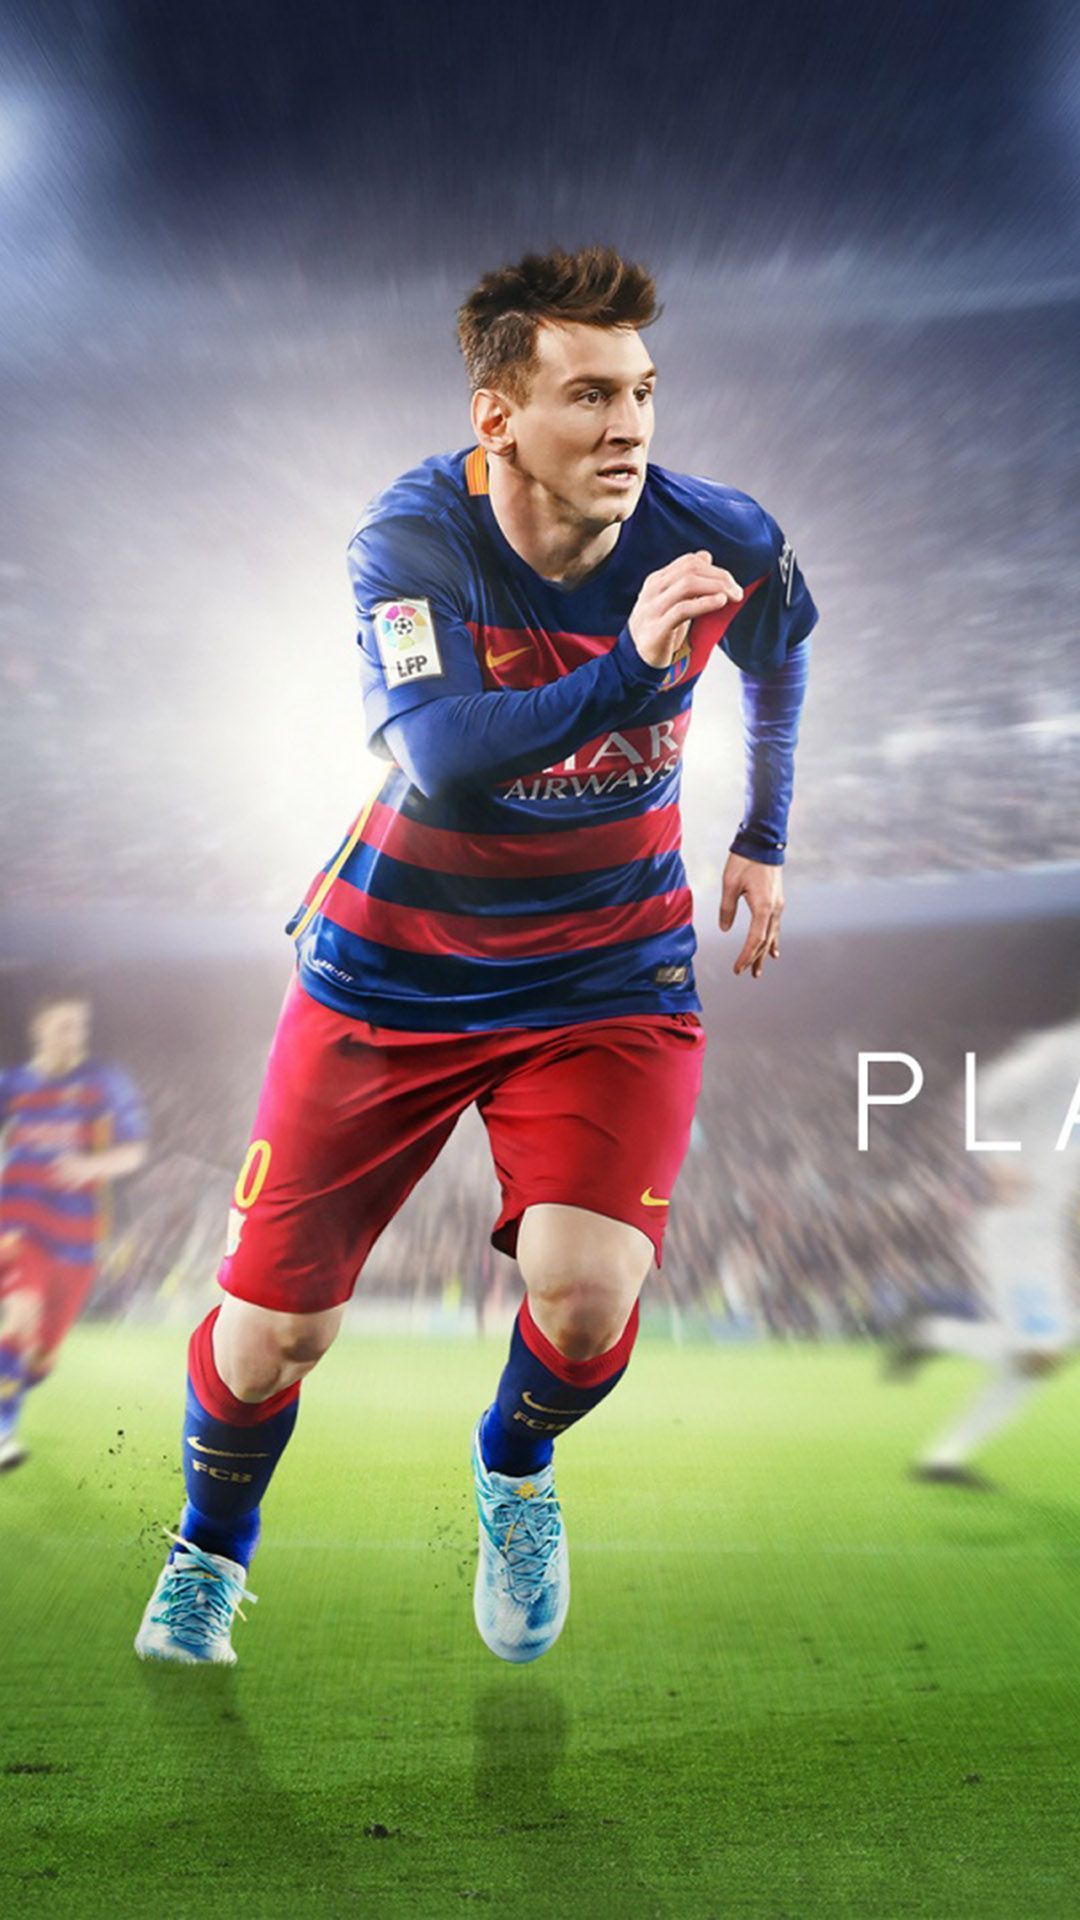 FIFA 16 Game Poster Lionel Messi Play Beautiful WallpapersByte com 1080x1920